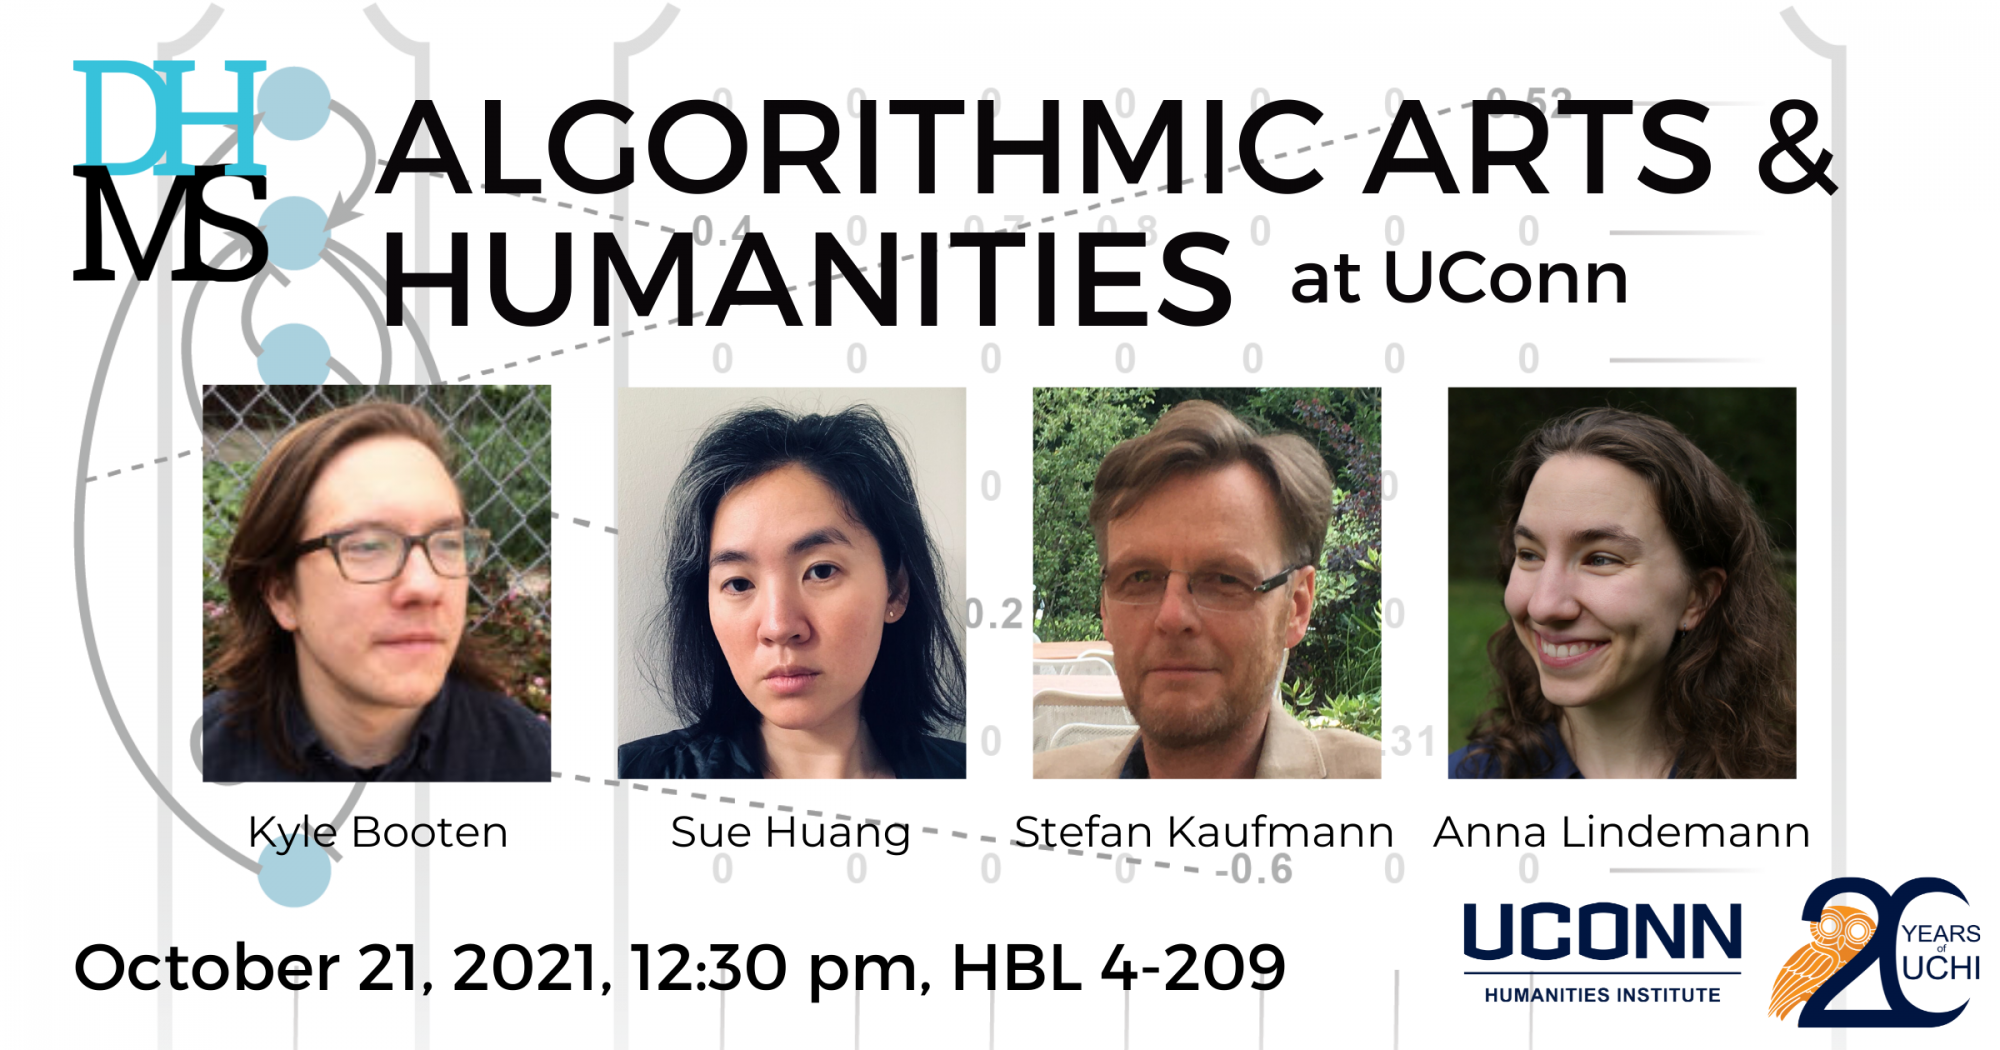 DHMS: Algorithmic Arts and Humanities at UConn. October 21, 2021, 12:30pm. HBL 4-209